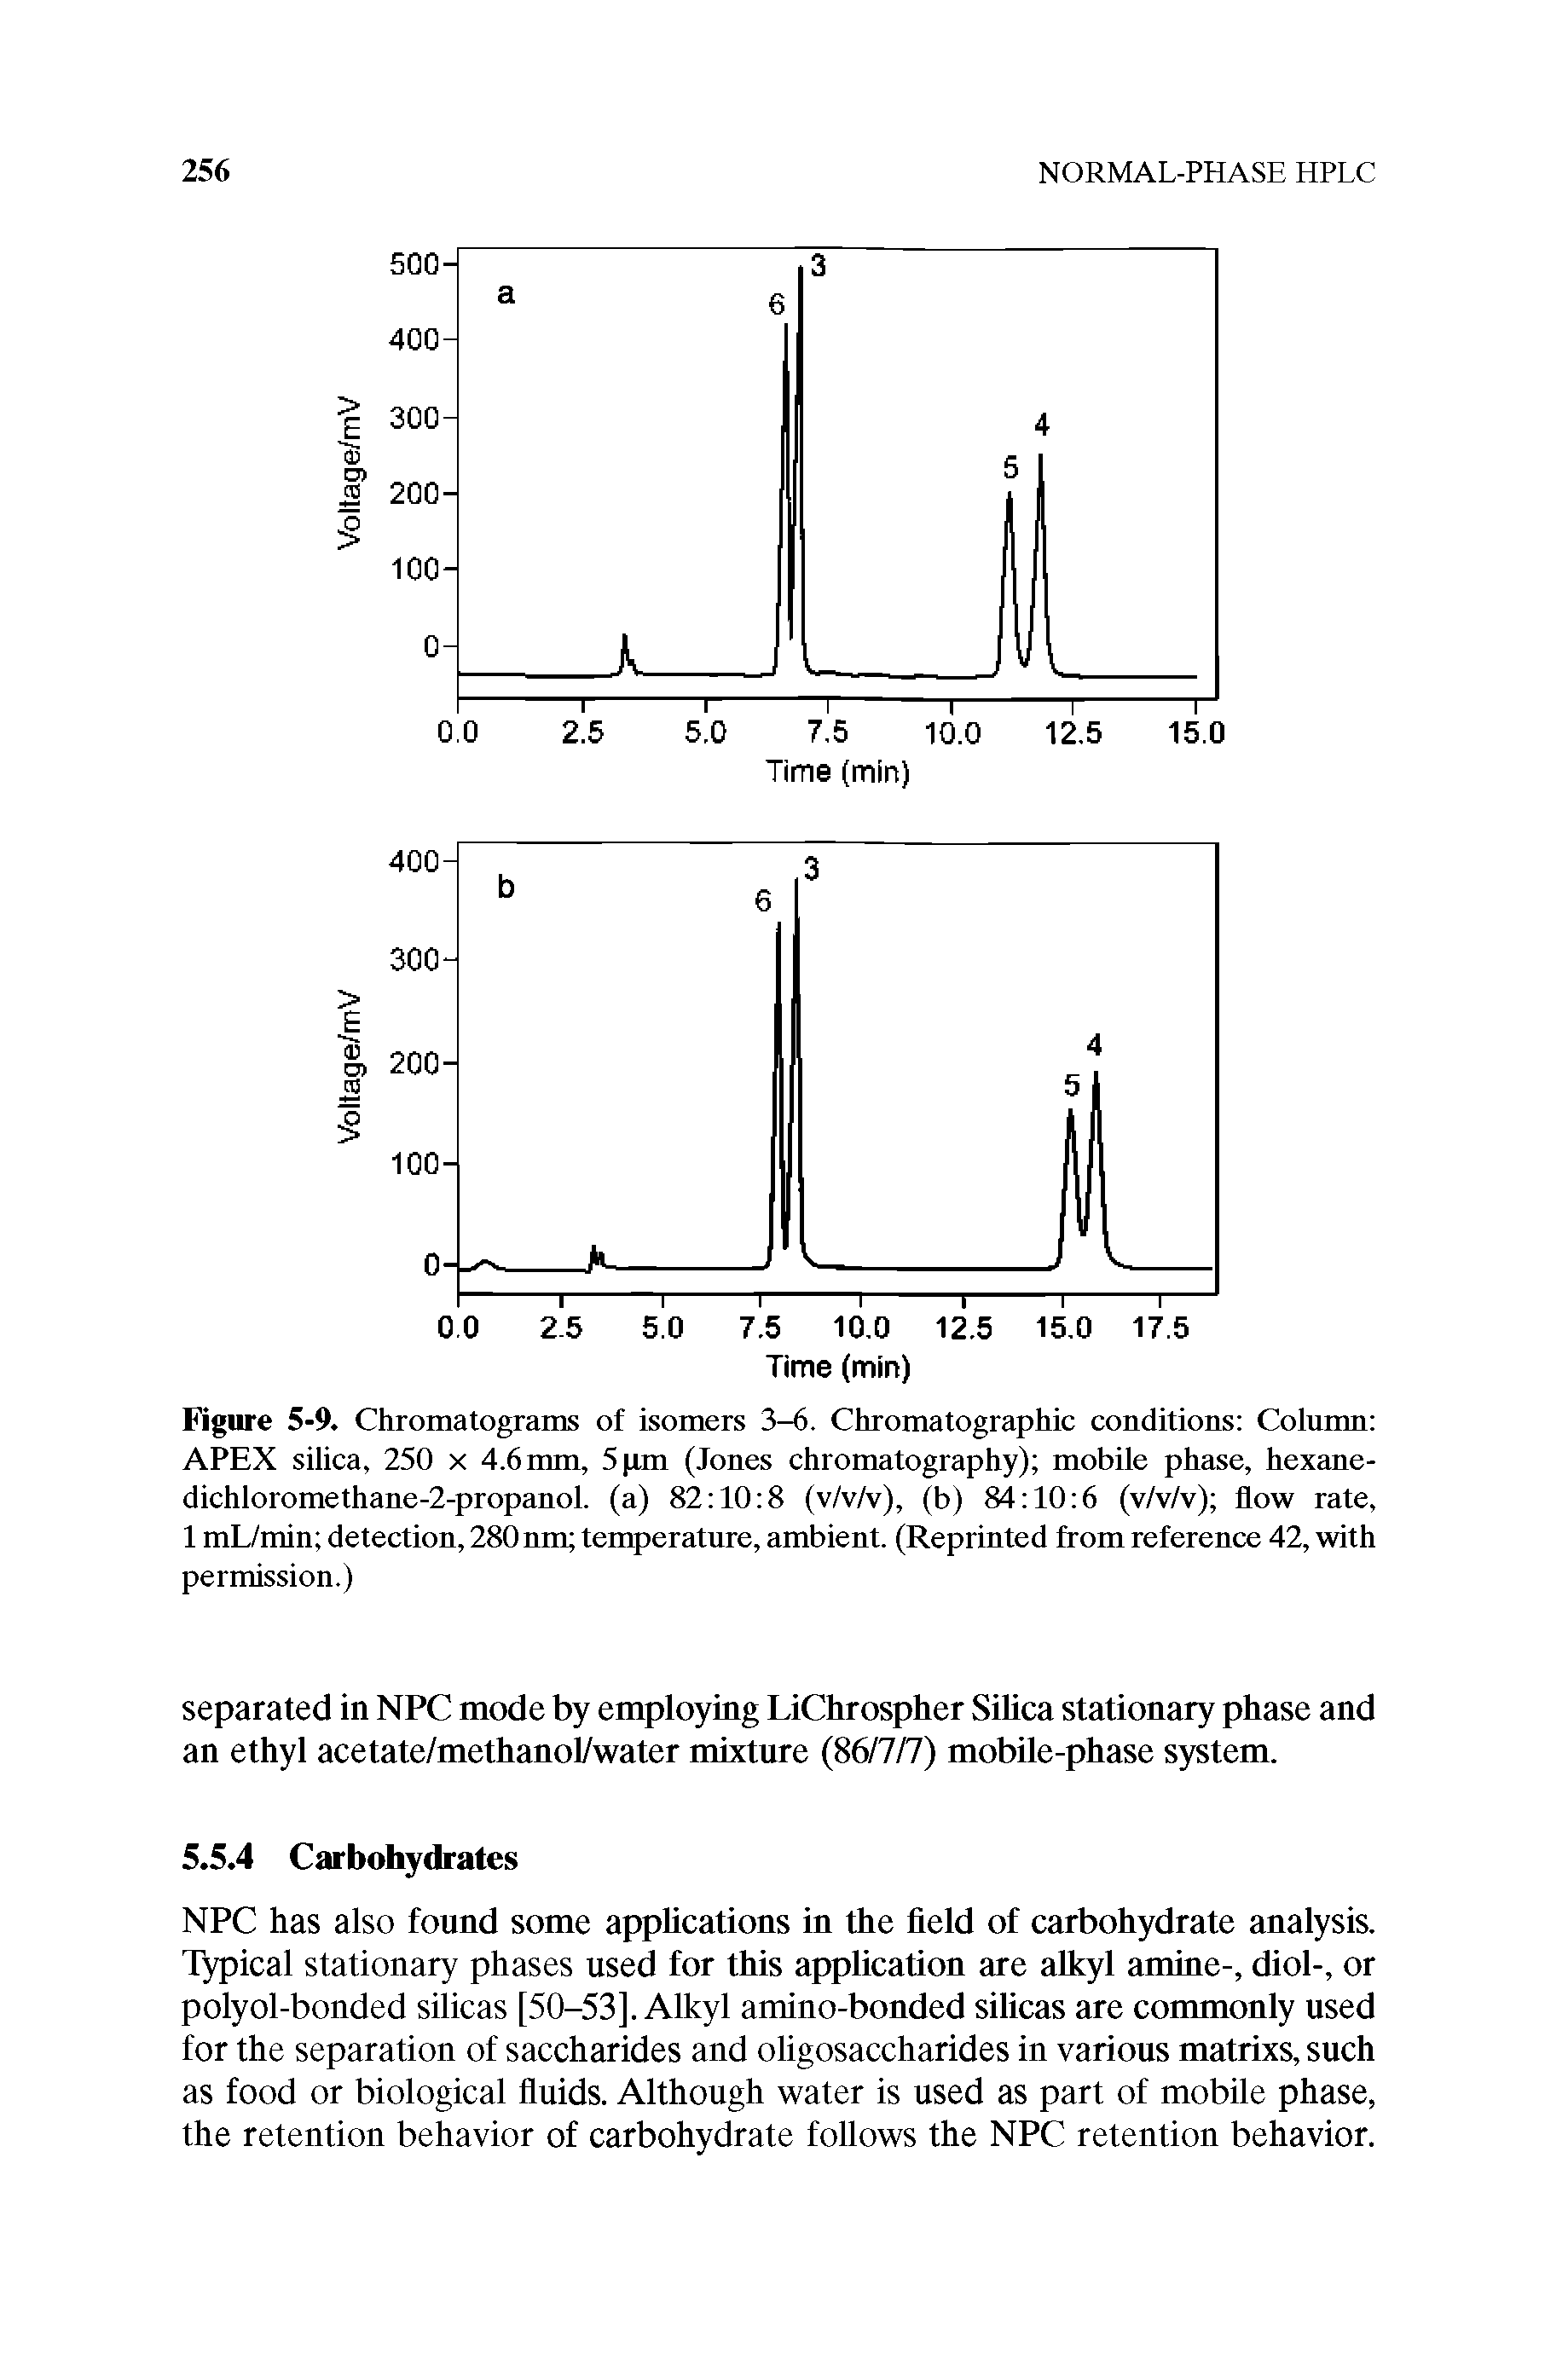 Figure 5-9. Chromatograms of isomers 3-6. Chromatographic conditions Colnmn APEX silica, 250 x 4.6 mm, 5 pm (Jones chromatography) mobile phase, hexane-dichloromethane-2-propanol. (a) 82 10 8 (v/v/v), (b) 84 10 6 (v/v/v) flow rate, 1 mL/min detection, 280 nm temperatnre, ambient. (Reprinted from reference 42, with permission.)...